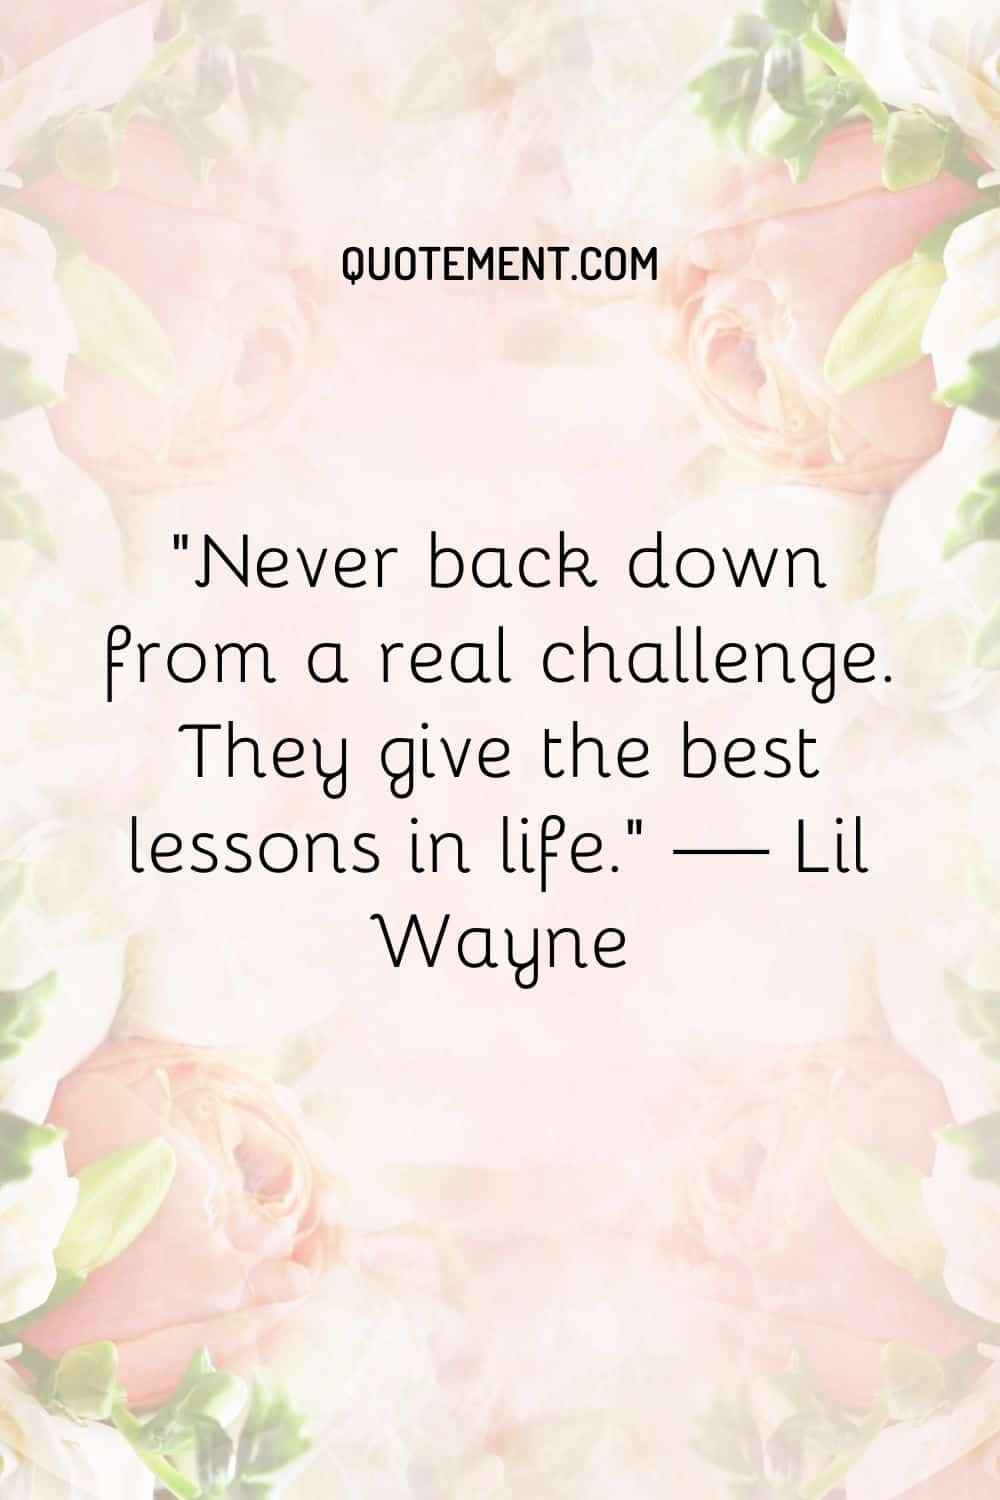 Never back down from a real challenge. They give the best lessons in life